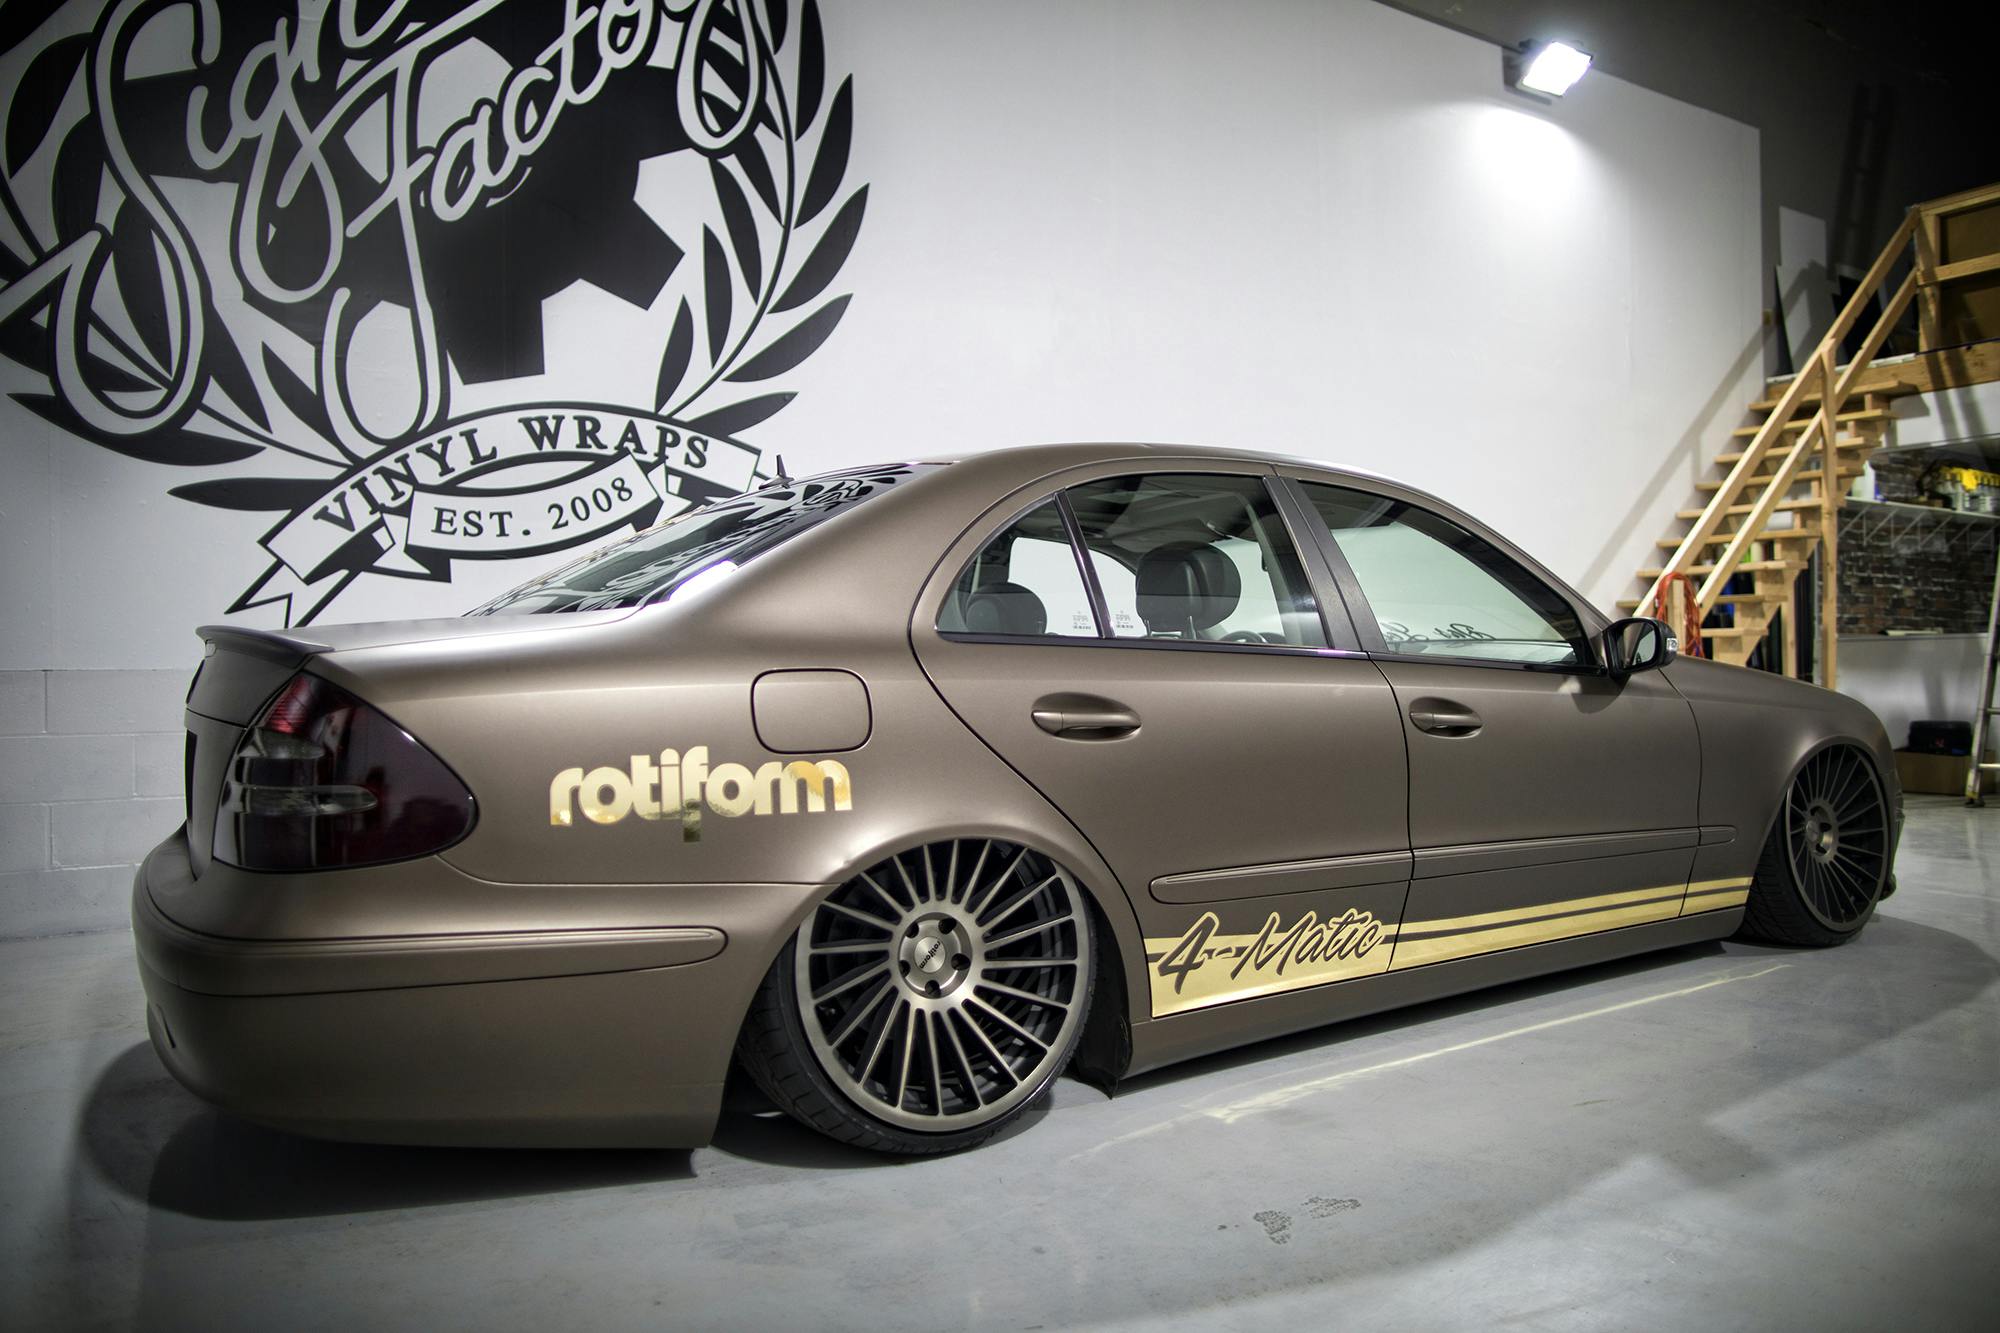 E350 4matic equipped with Rotiform wheels and universal air suspension